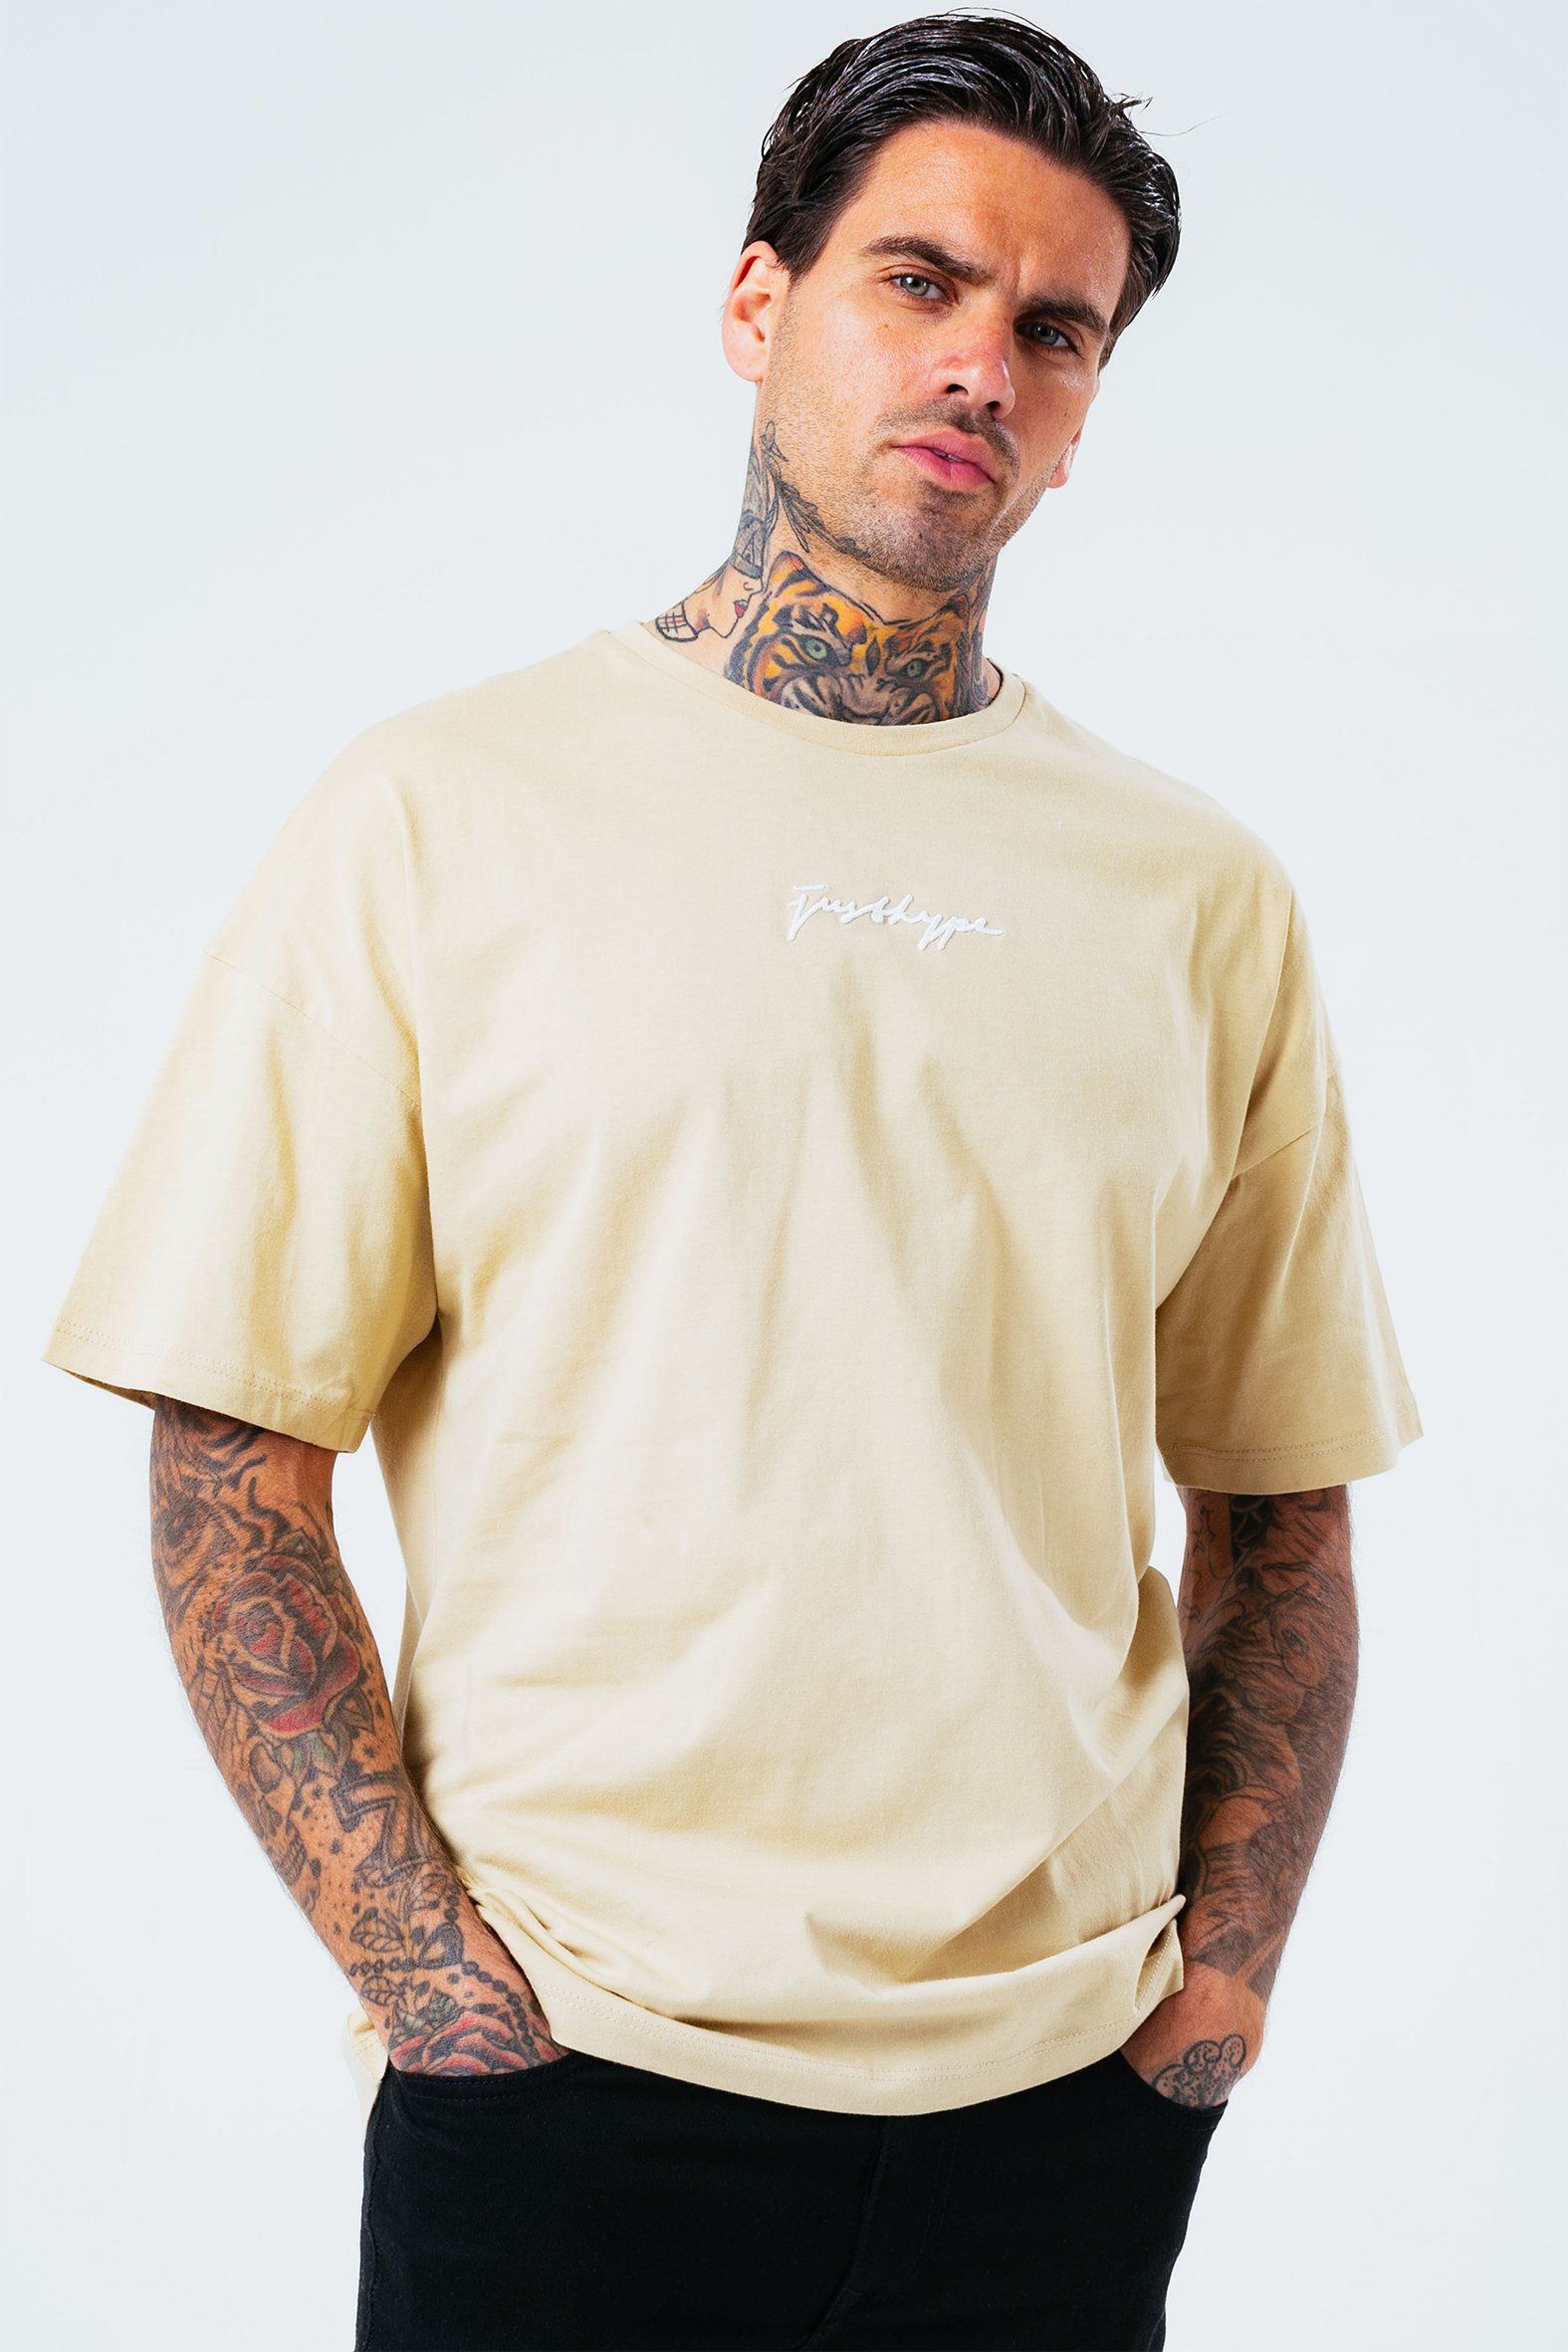 The HYPE. Ecru Oversized Men's T-shirt boasts a neutral-beige colour palette in an 100% cotton fabric base for supreme comfort. Designed in our oversized men's tee shape, with a crew neck line and oversized sleeve drops for a trending oversized fit. Finished with an embroidered mini H on the front. Wear with black skinny fit jeans for a smart-casual vibe. Machine wash at 30 degrees.